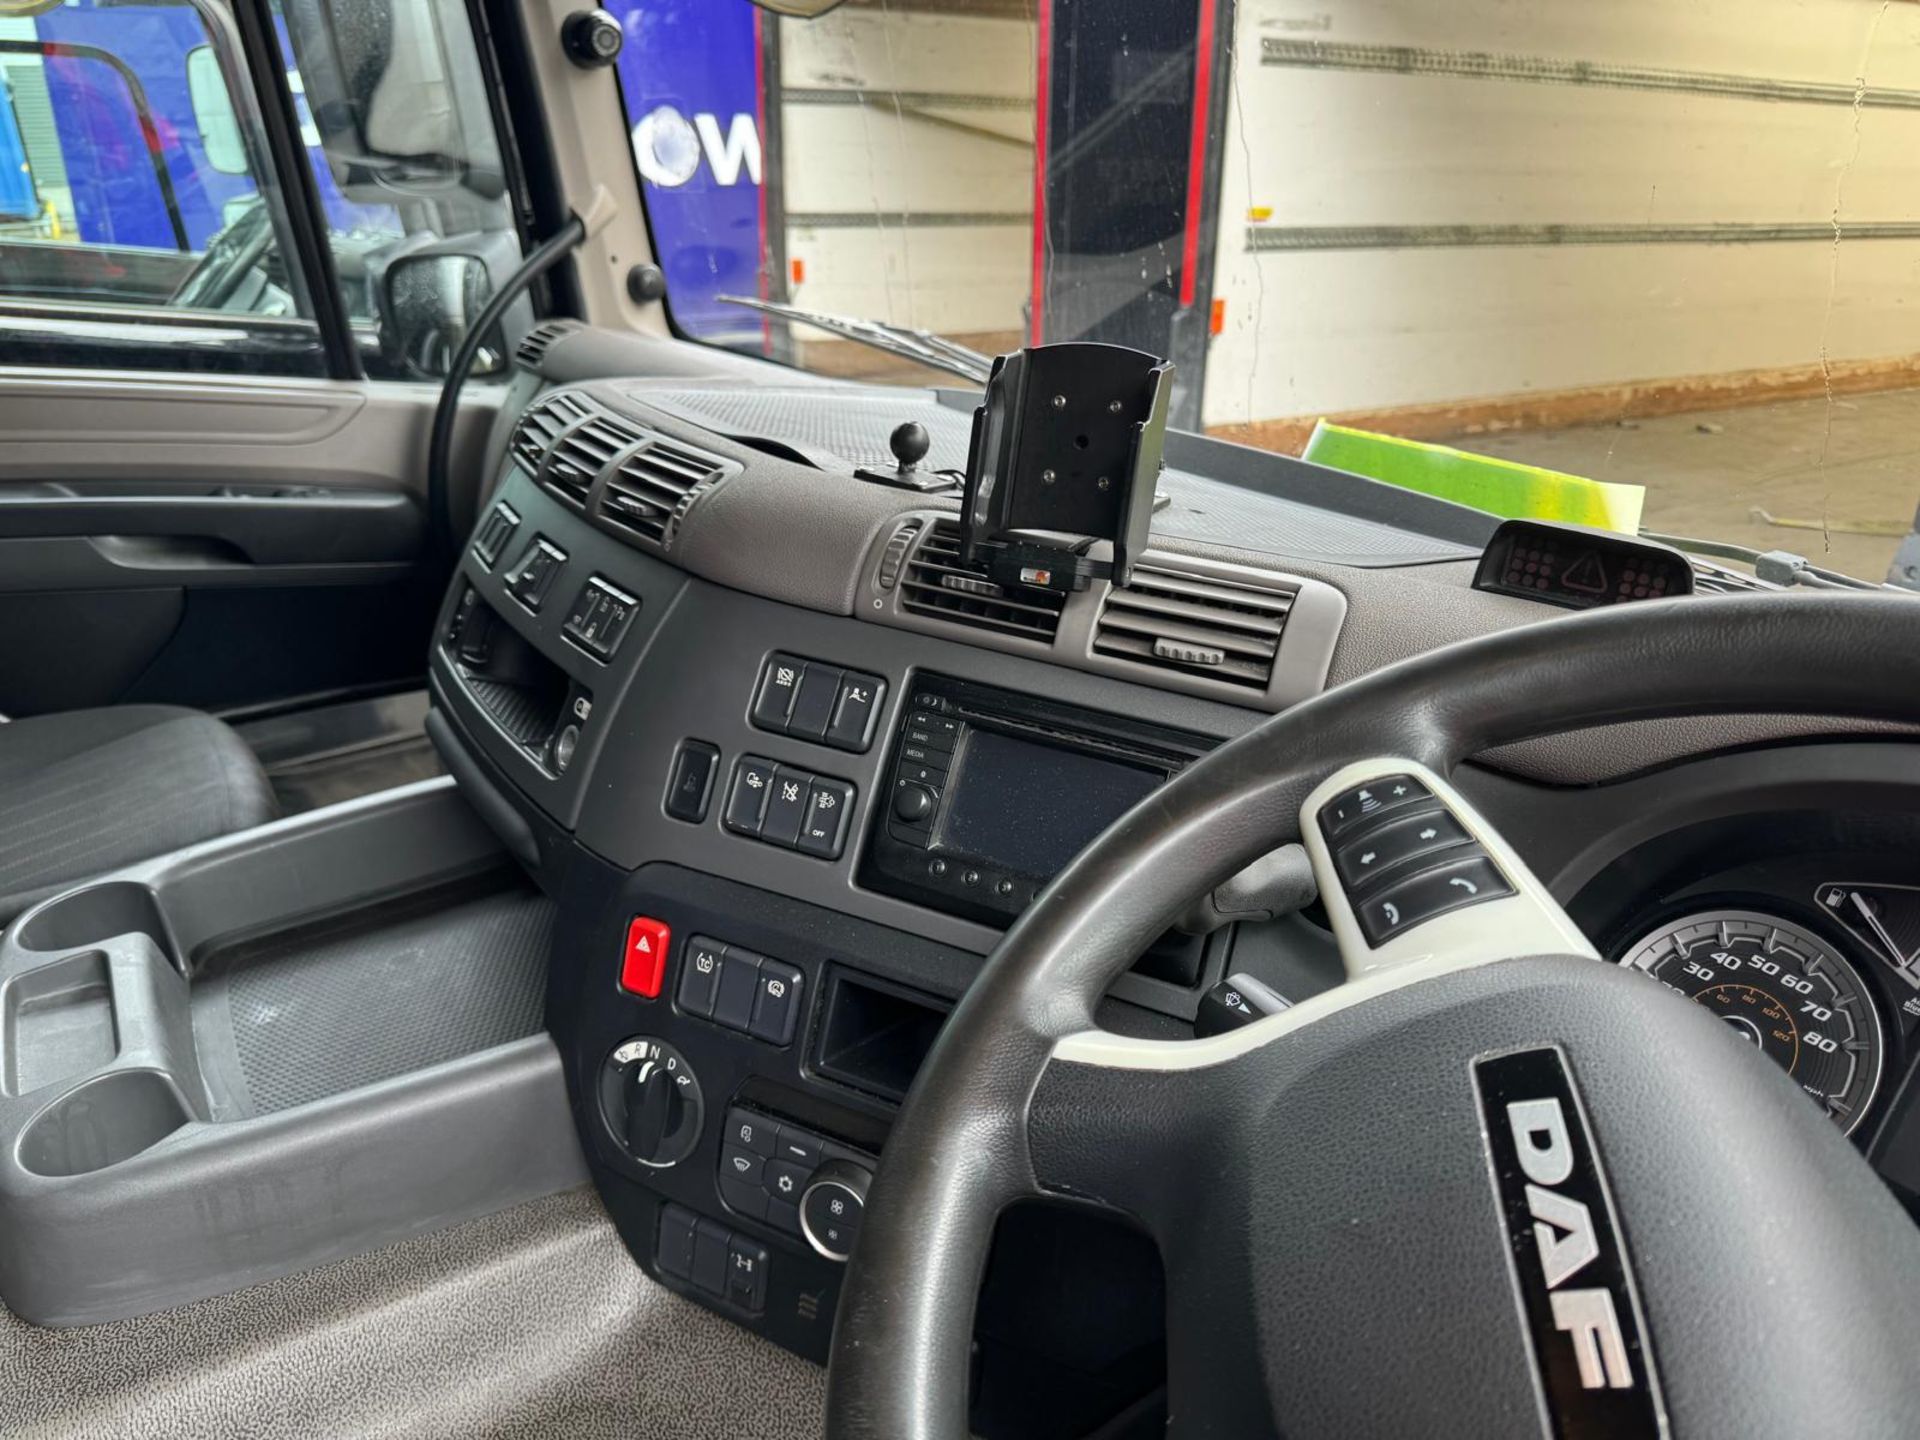 2019, DAF CF 260 FA (Ex-Fleet Owned & Maintained) - FN69 AXD (18 Ton Rigid Truck with Tail Lift) - Image 5 of 11